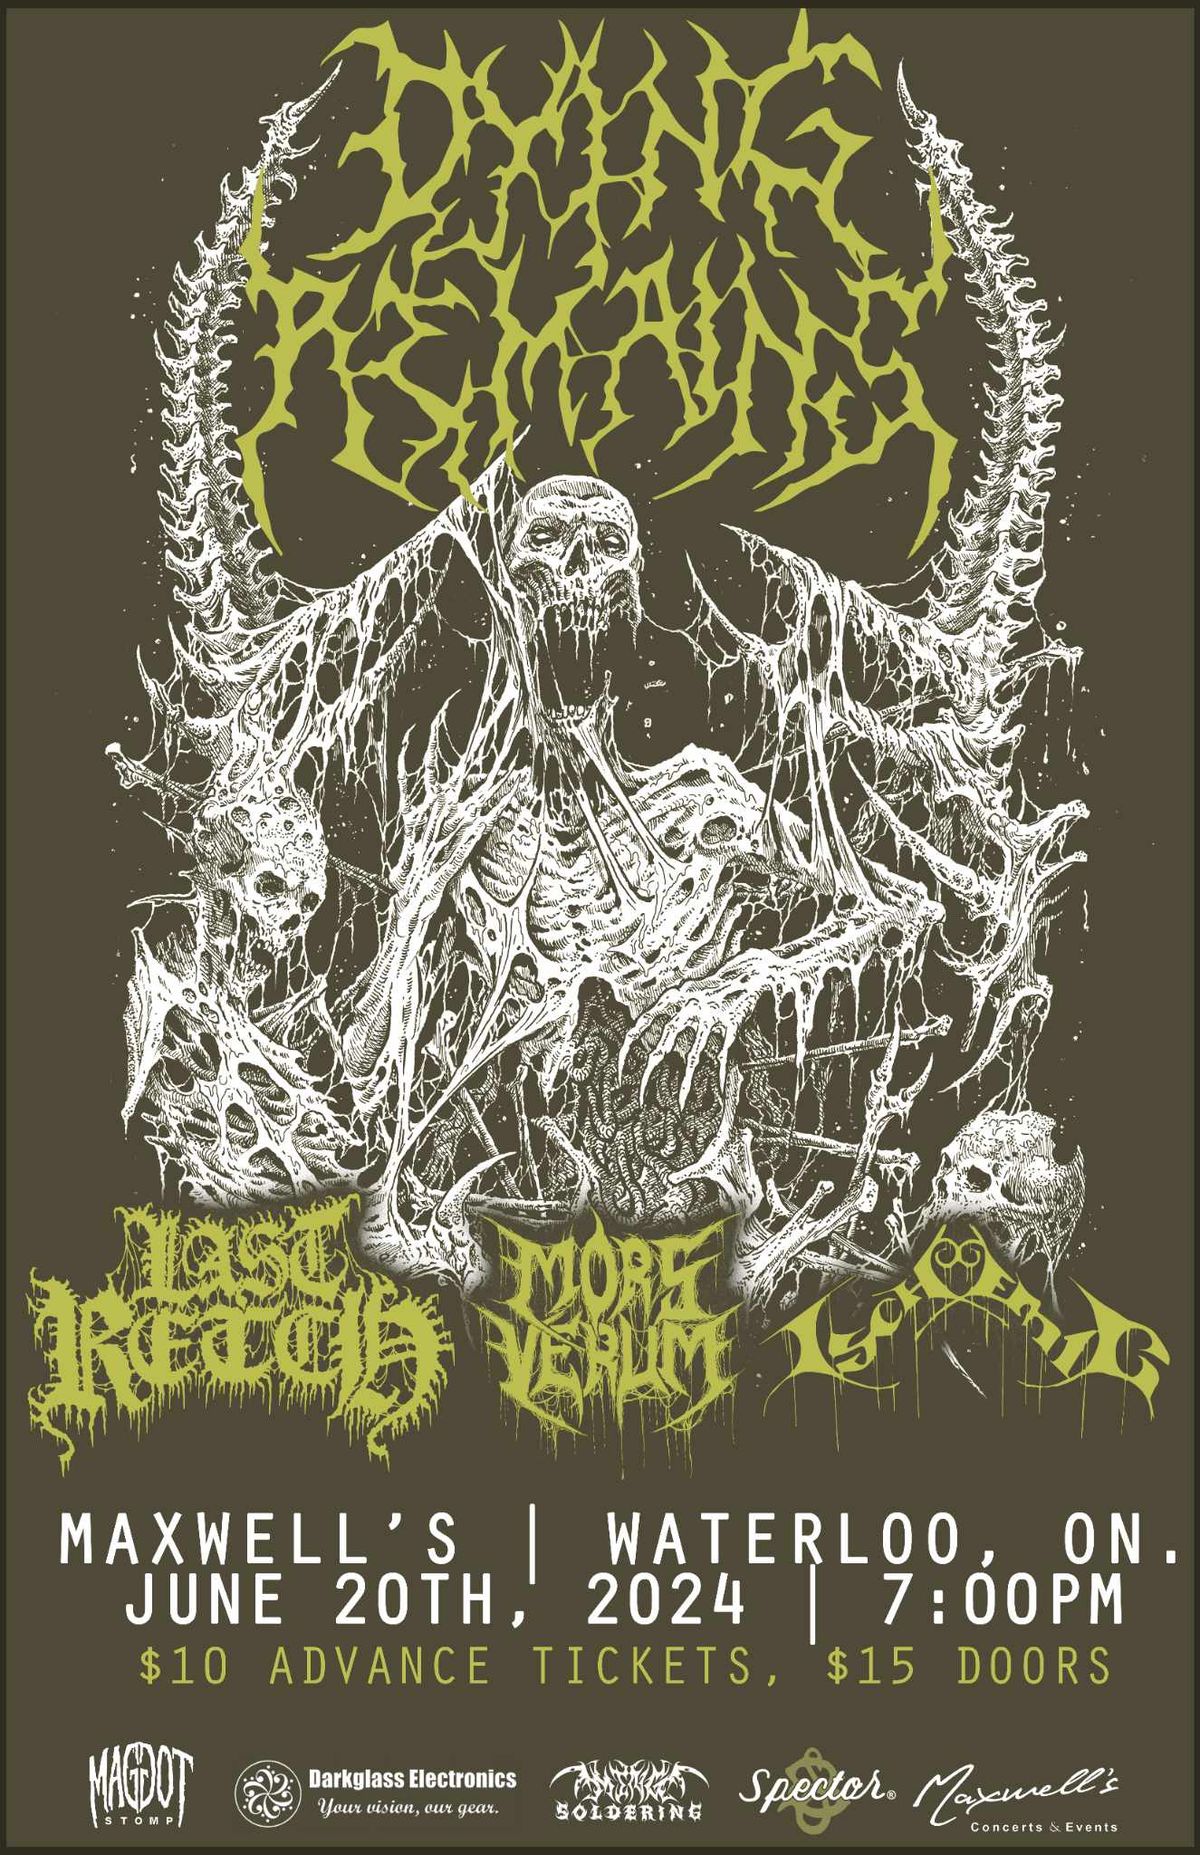 Dying Remains\/Last Retch\/Mors Verum\/Ischemic June 20th @ Maxwell's 